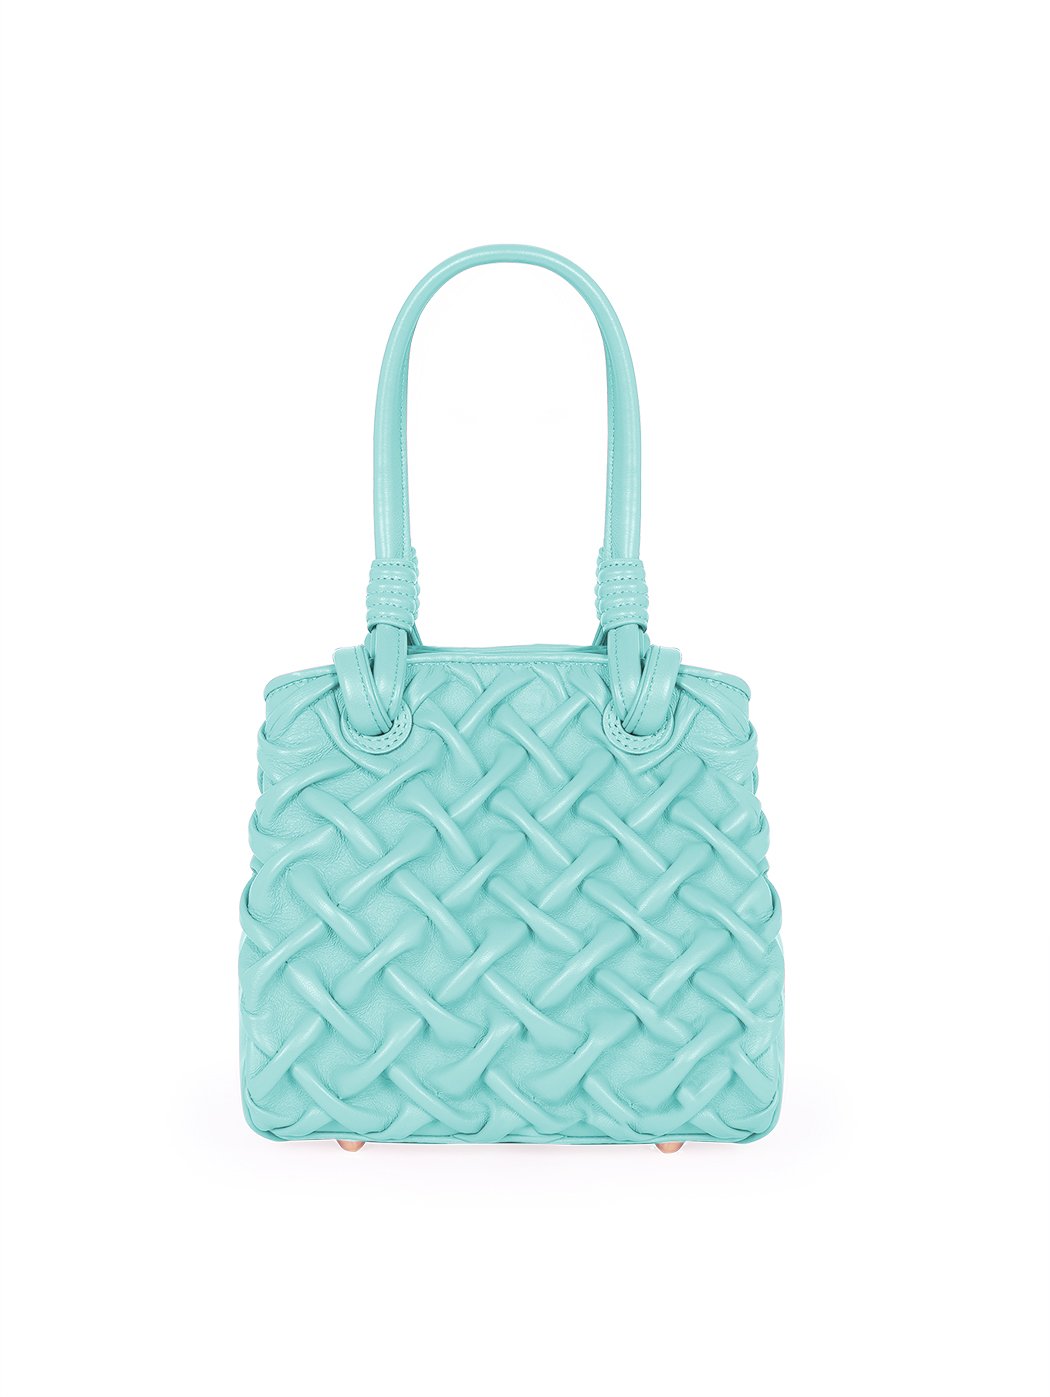 Top Handle Crossbody Quilted Weave Leather Purse Aqua Blue